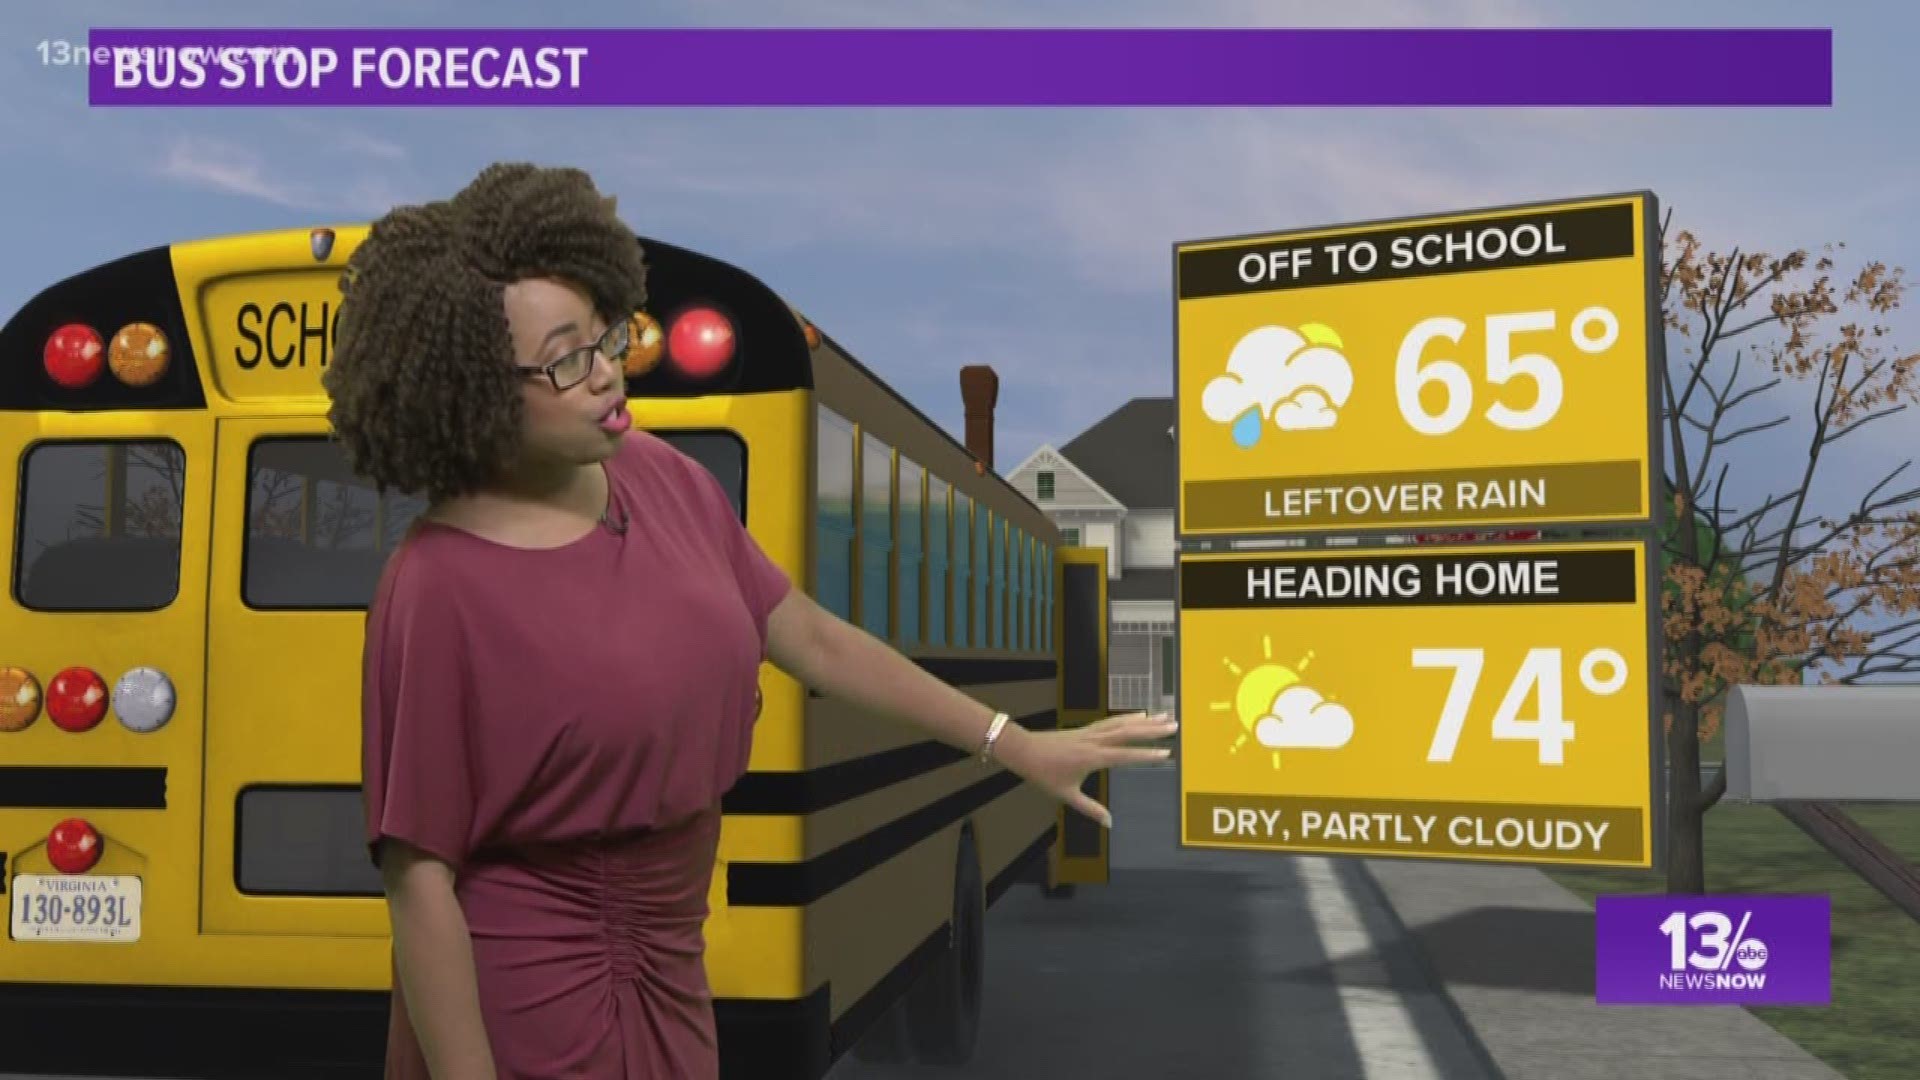 Meteorologist Rachael Peart brings you the forecast from the Weather Authority